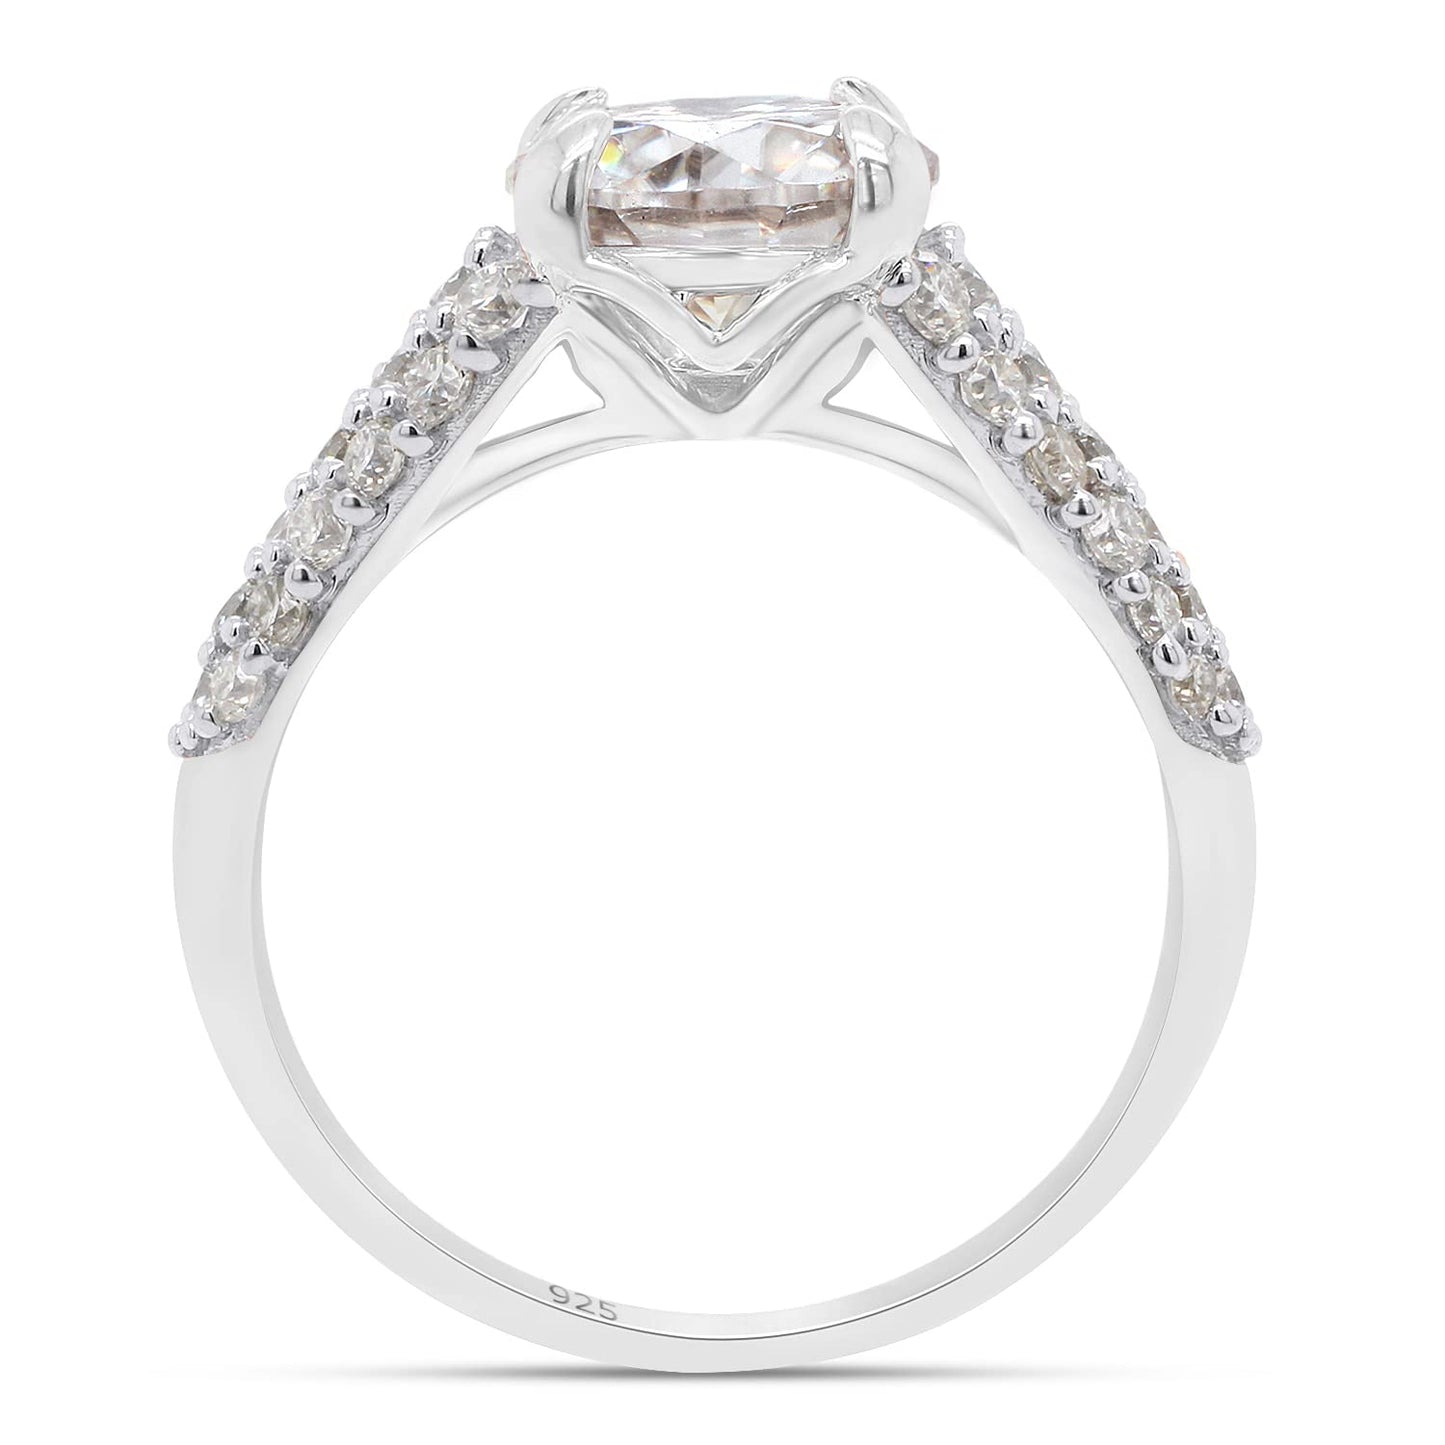 8.5MM Round Cut Lab Created Moissanite Diamond Multi Row Engagement Ring in Sterling Silver (2.50 Cttw)